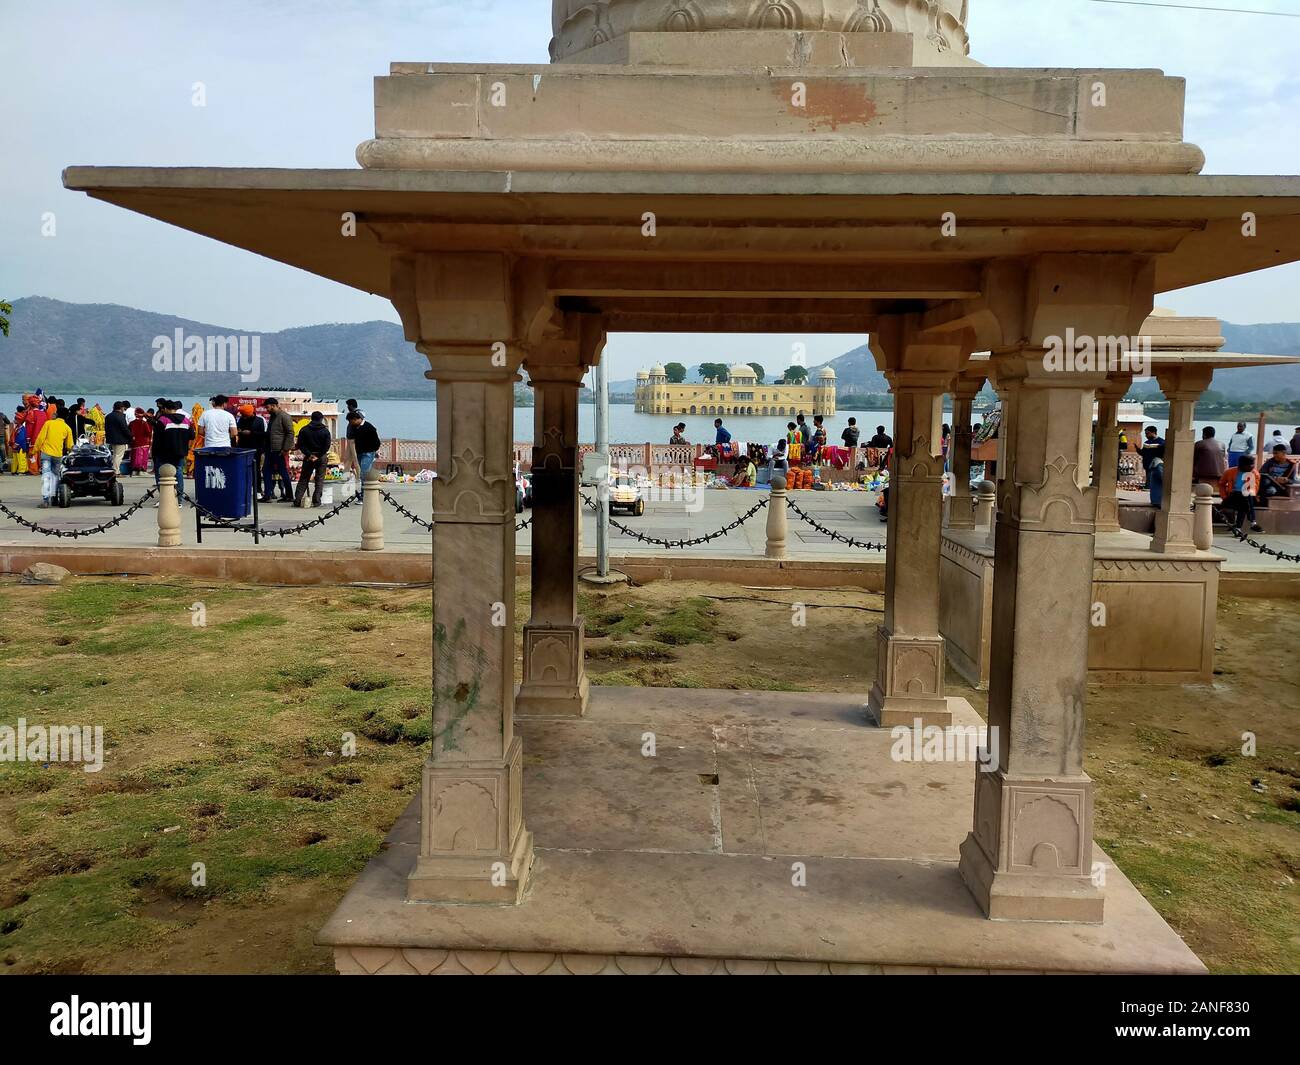 View of the famous Jalmahal of Jaipur Stock Photo